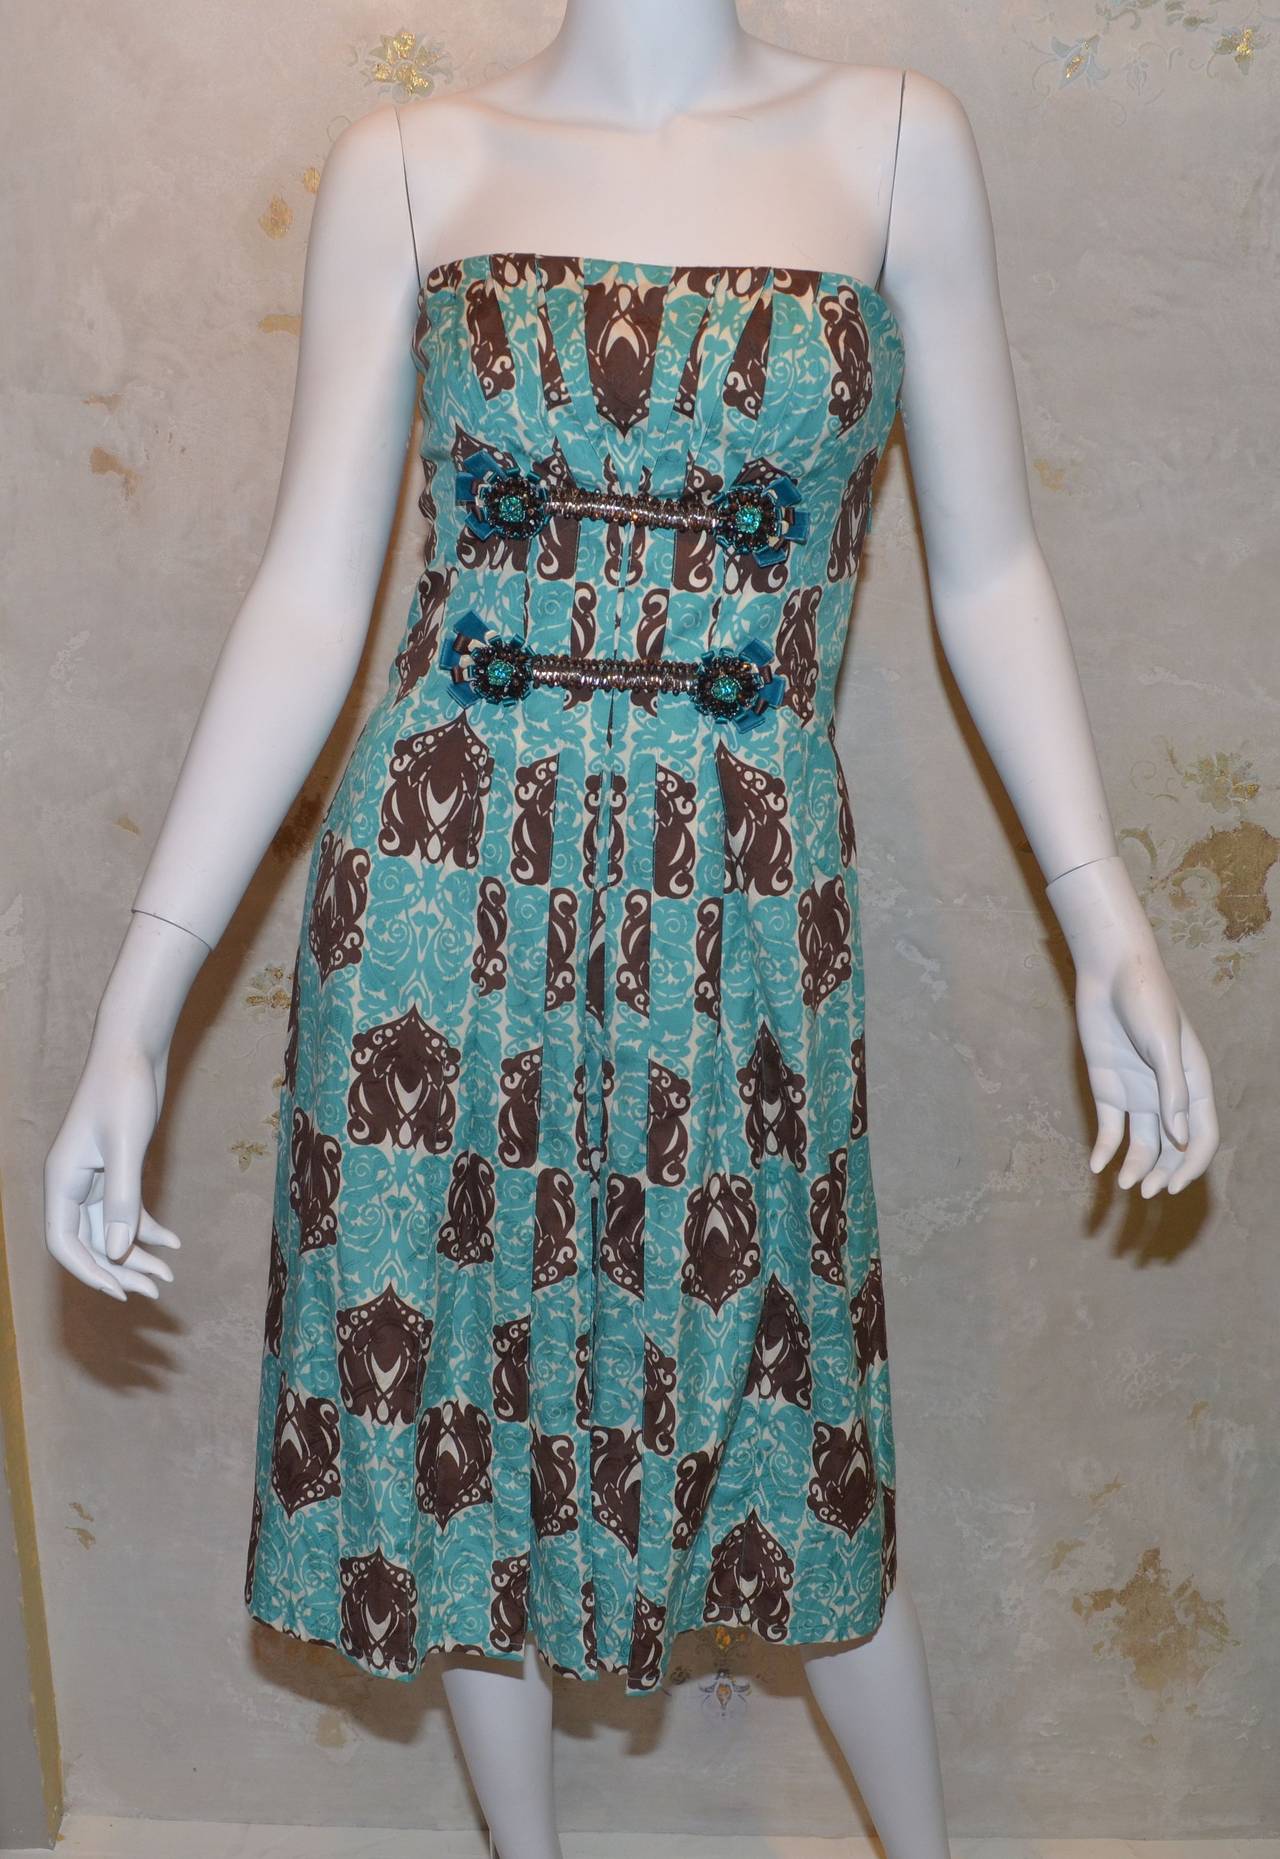 NWT Carolina Herrera Turquoise Blue Brown Print Embellished Strapless Dress

Carolina Herrera dress features a turquoise and brown print with bead embellishing at the front and back center of the bodice. Bust is partly boned. Side zipper and